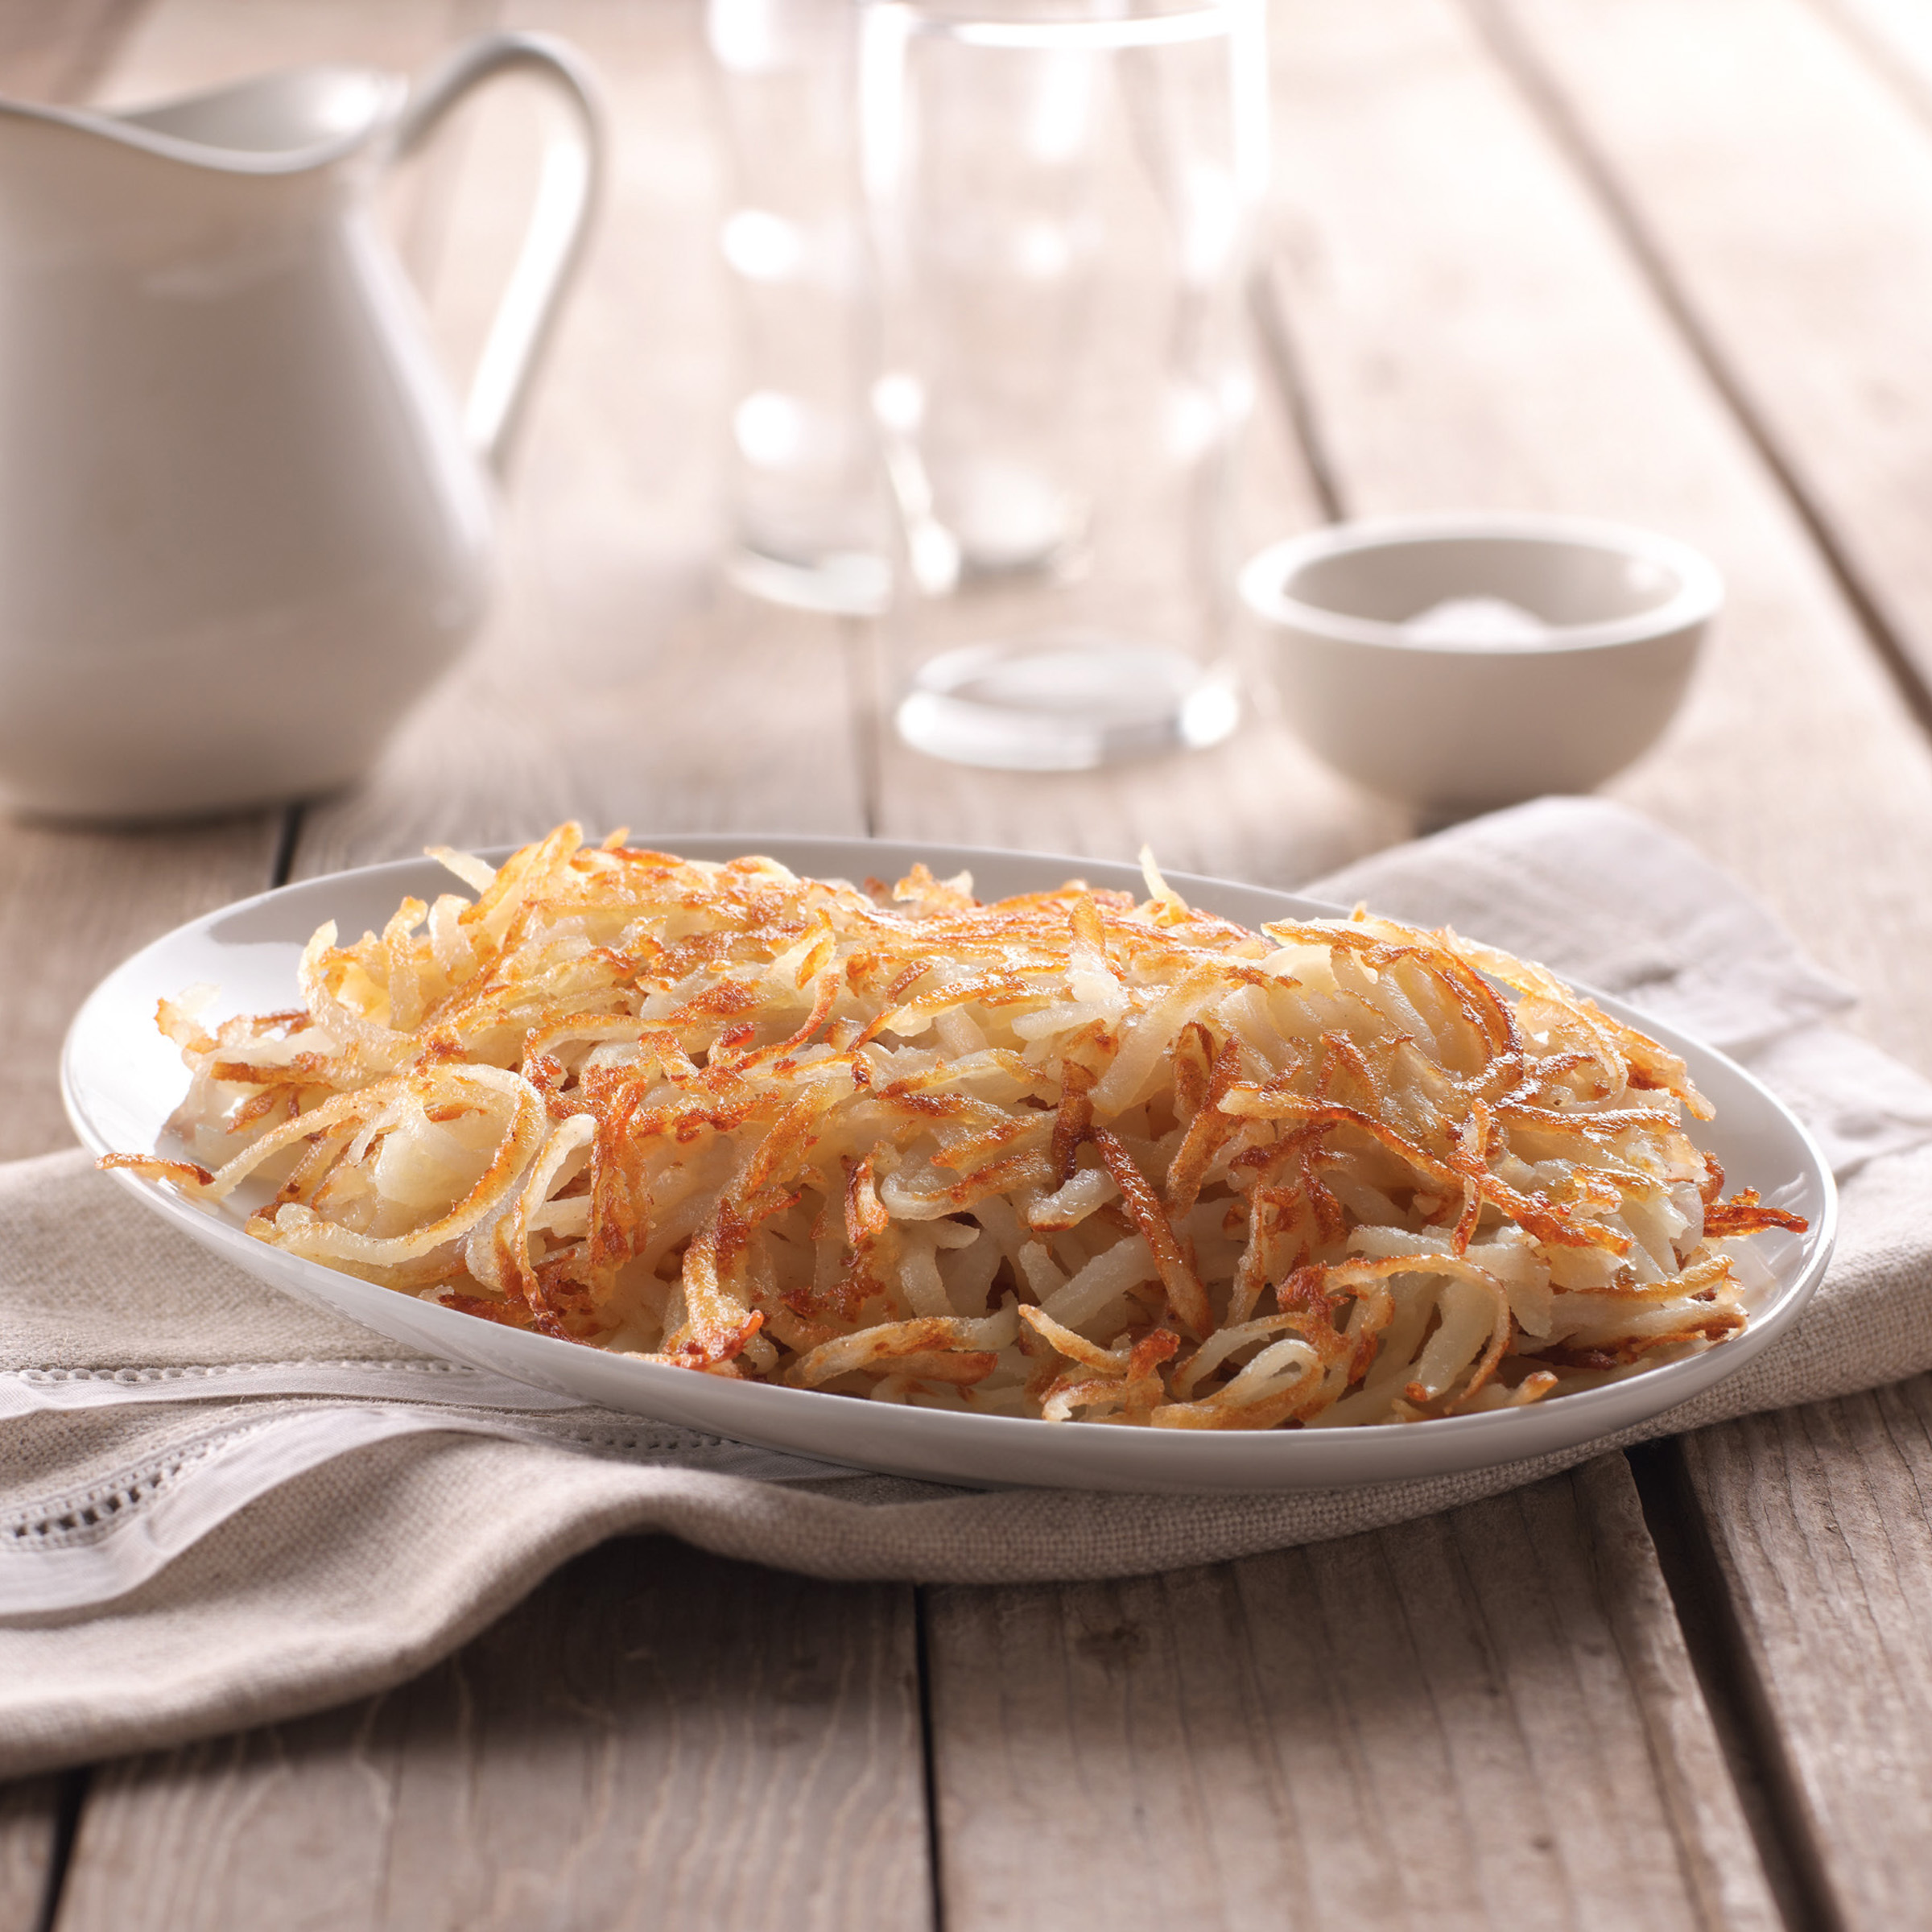 Simply Potatoes® Refrigerated Shredded Hash Browns made with peeled Russet potatoes, shredded 3/16